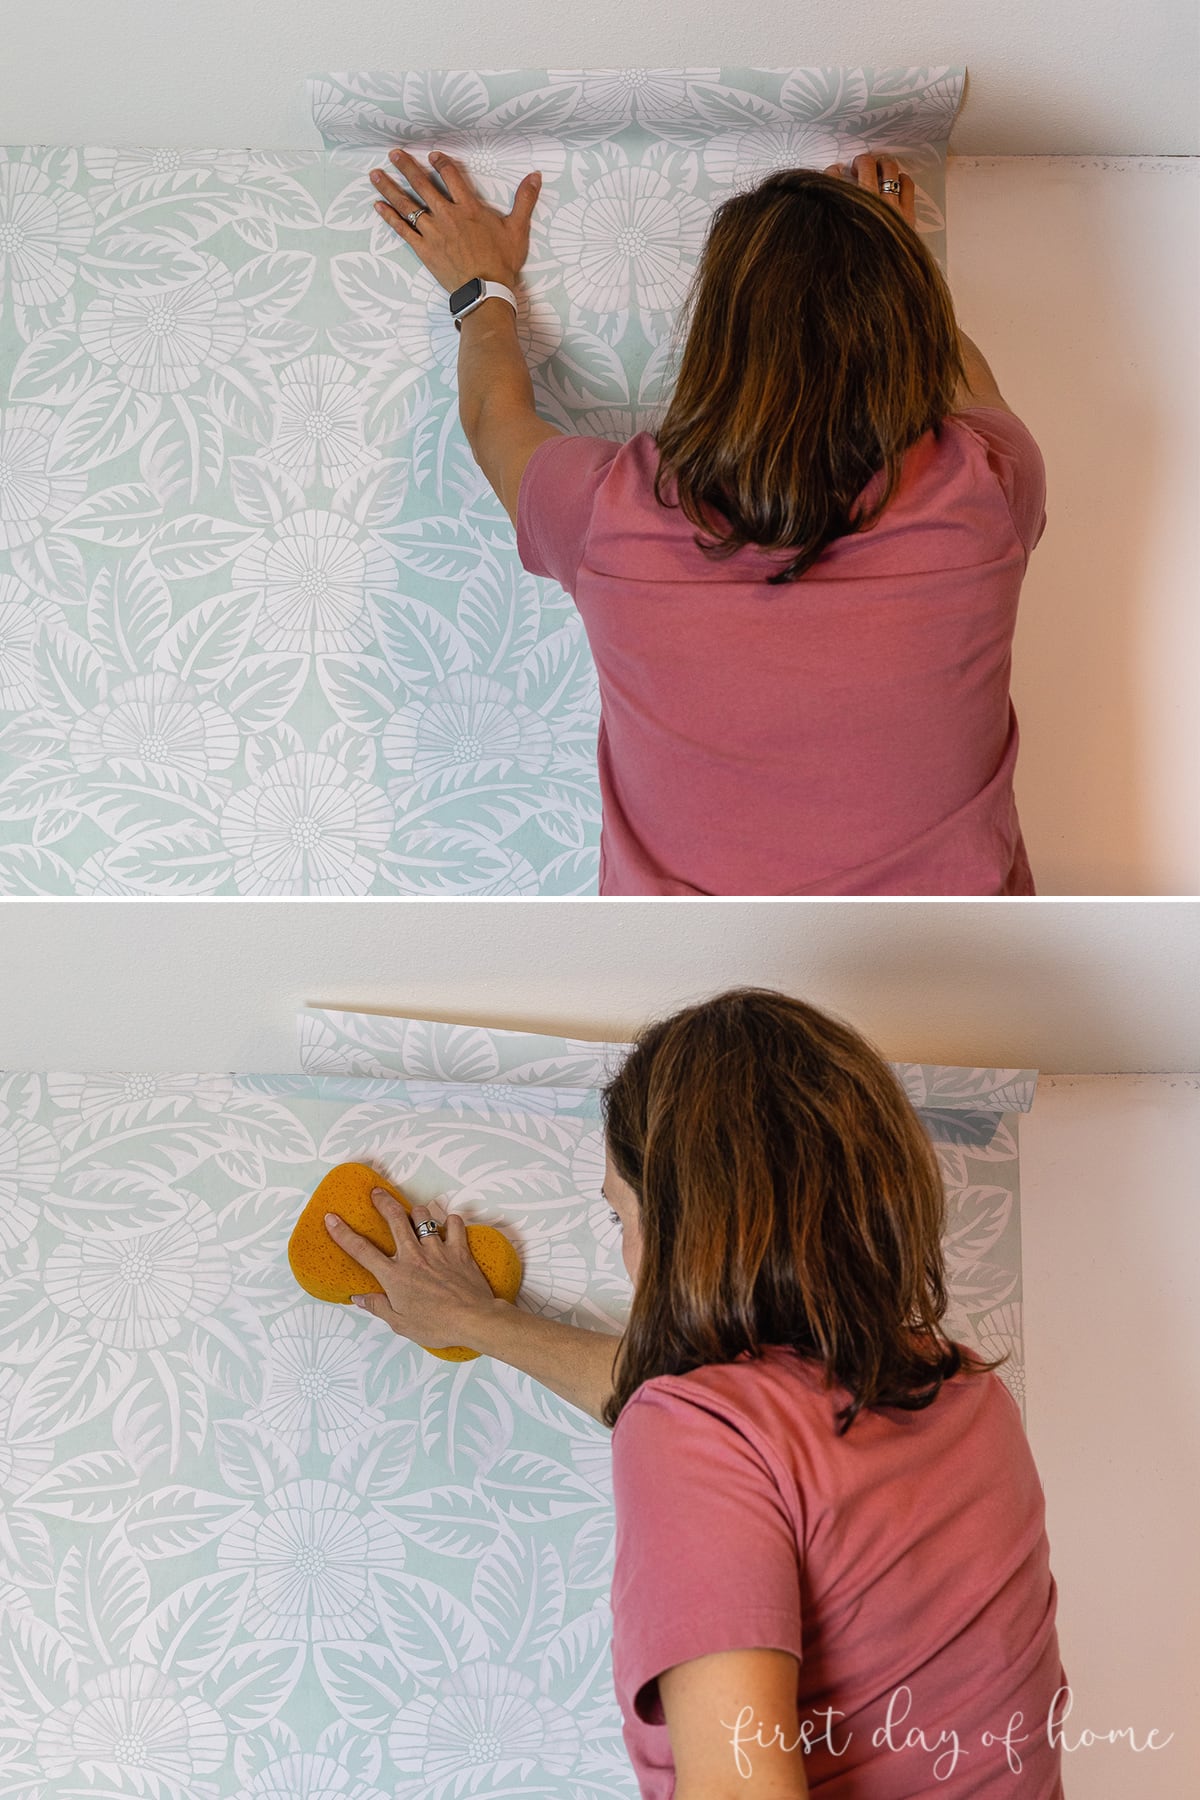 Crissy installing Milton & King wallpaper and smoothing with sponge